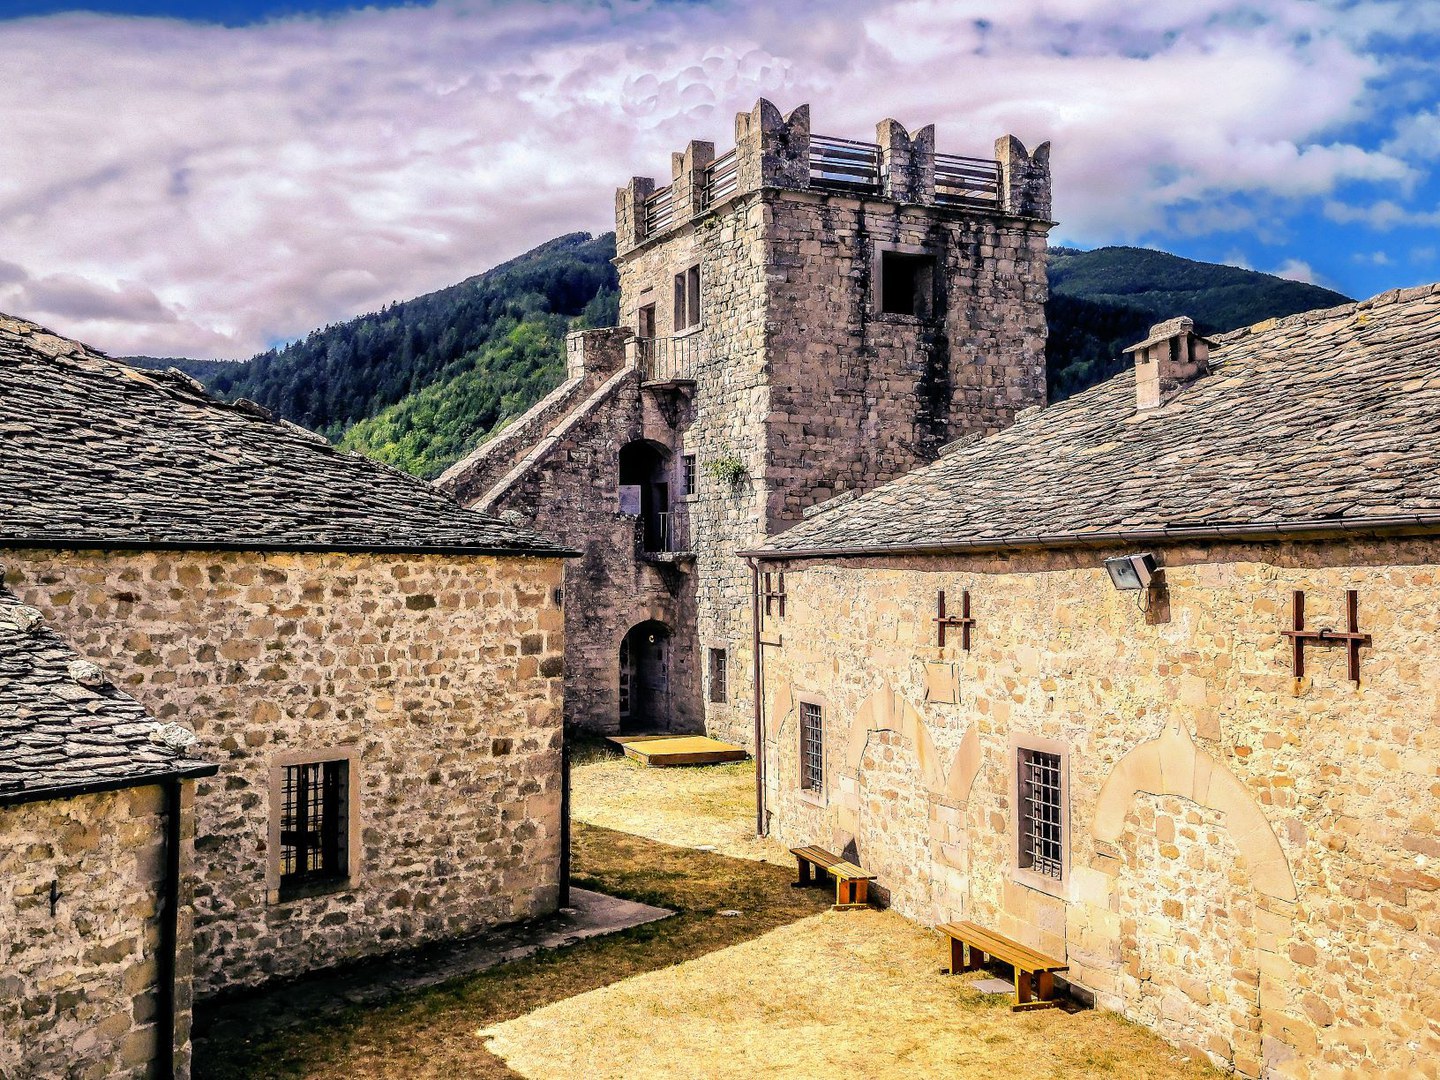 Castles in the Apennines